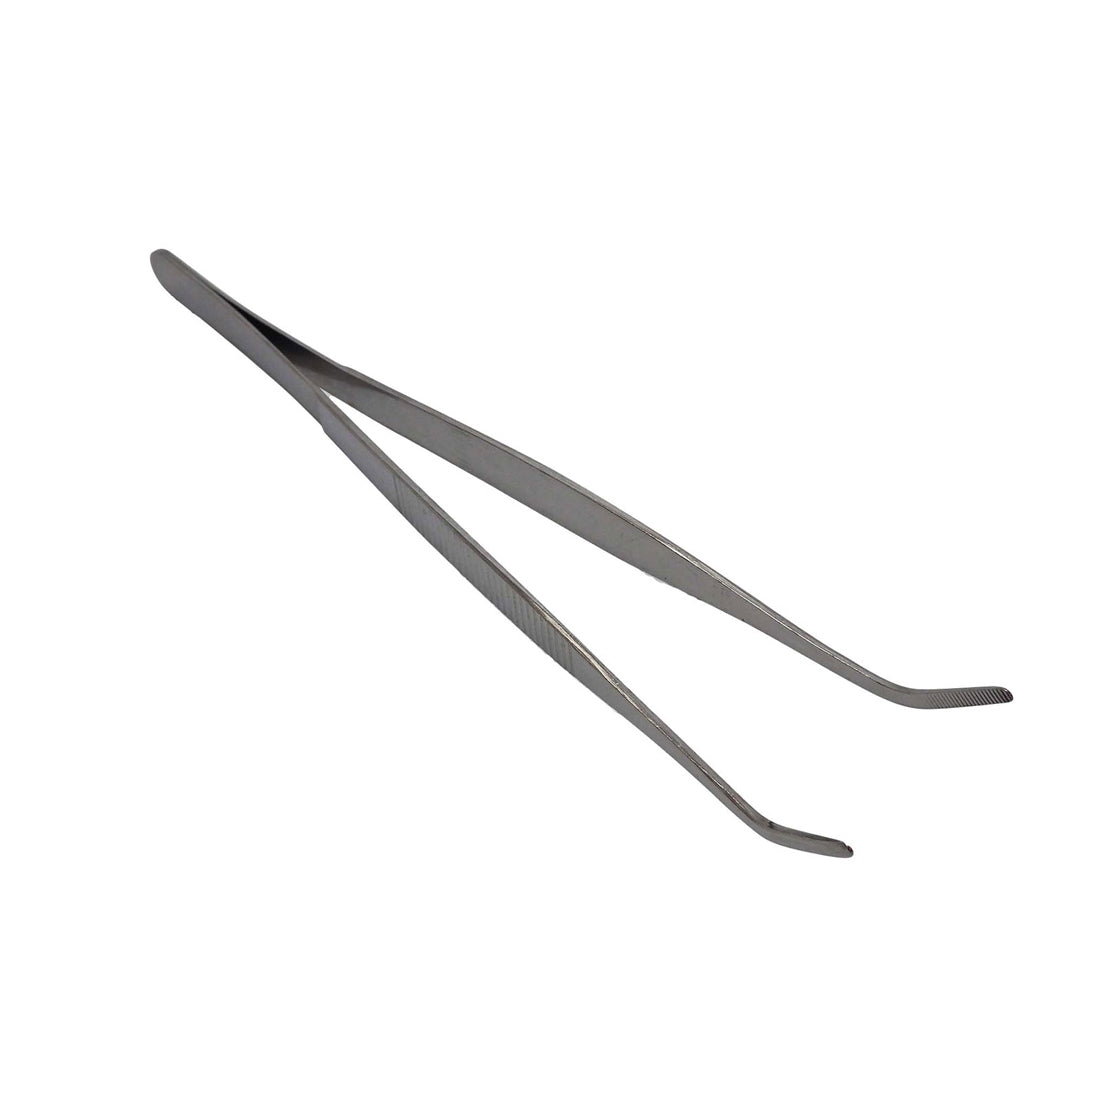 Livefood Stainless Steel Tweezers Curved End 300mm (12")